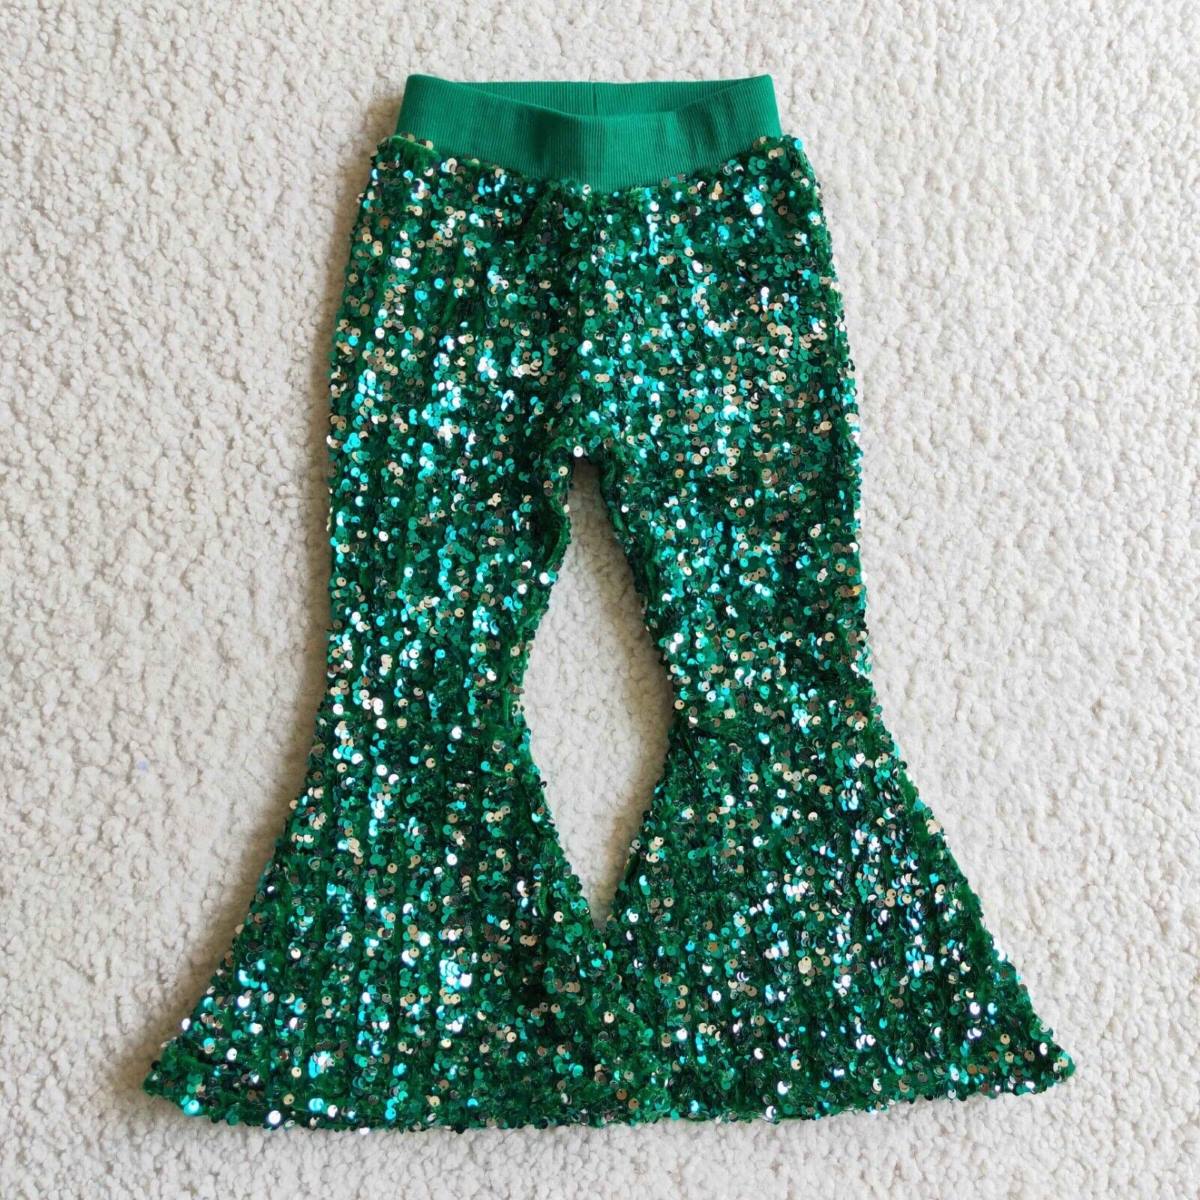 17-astonishing-facts-about-sequin-pants